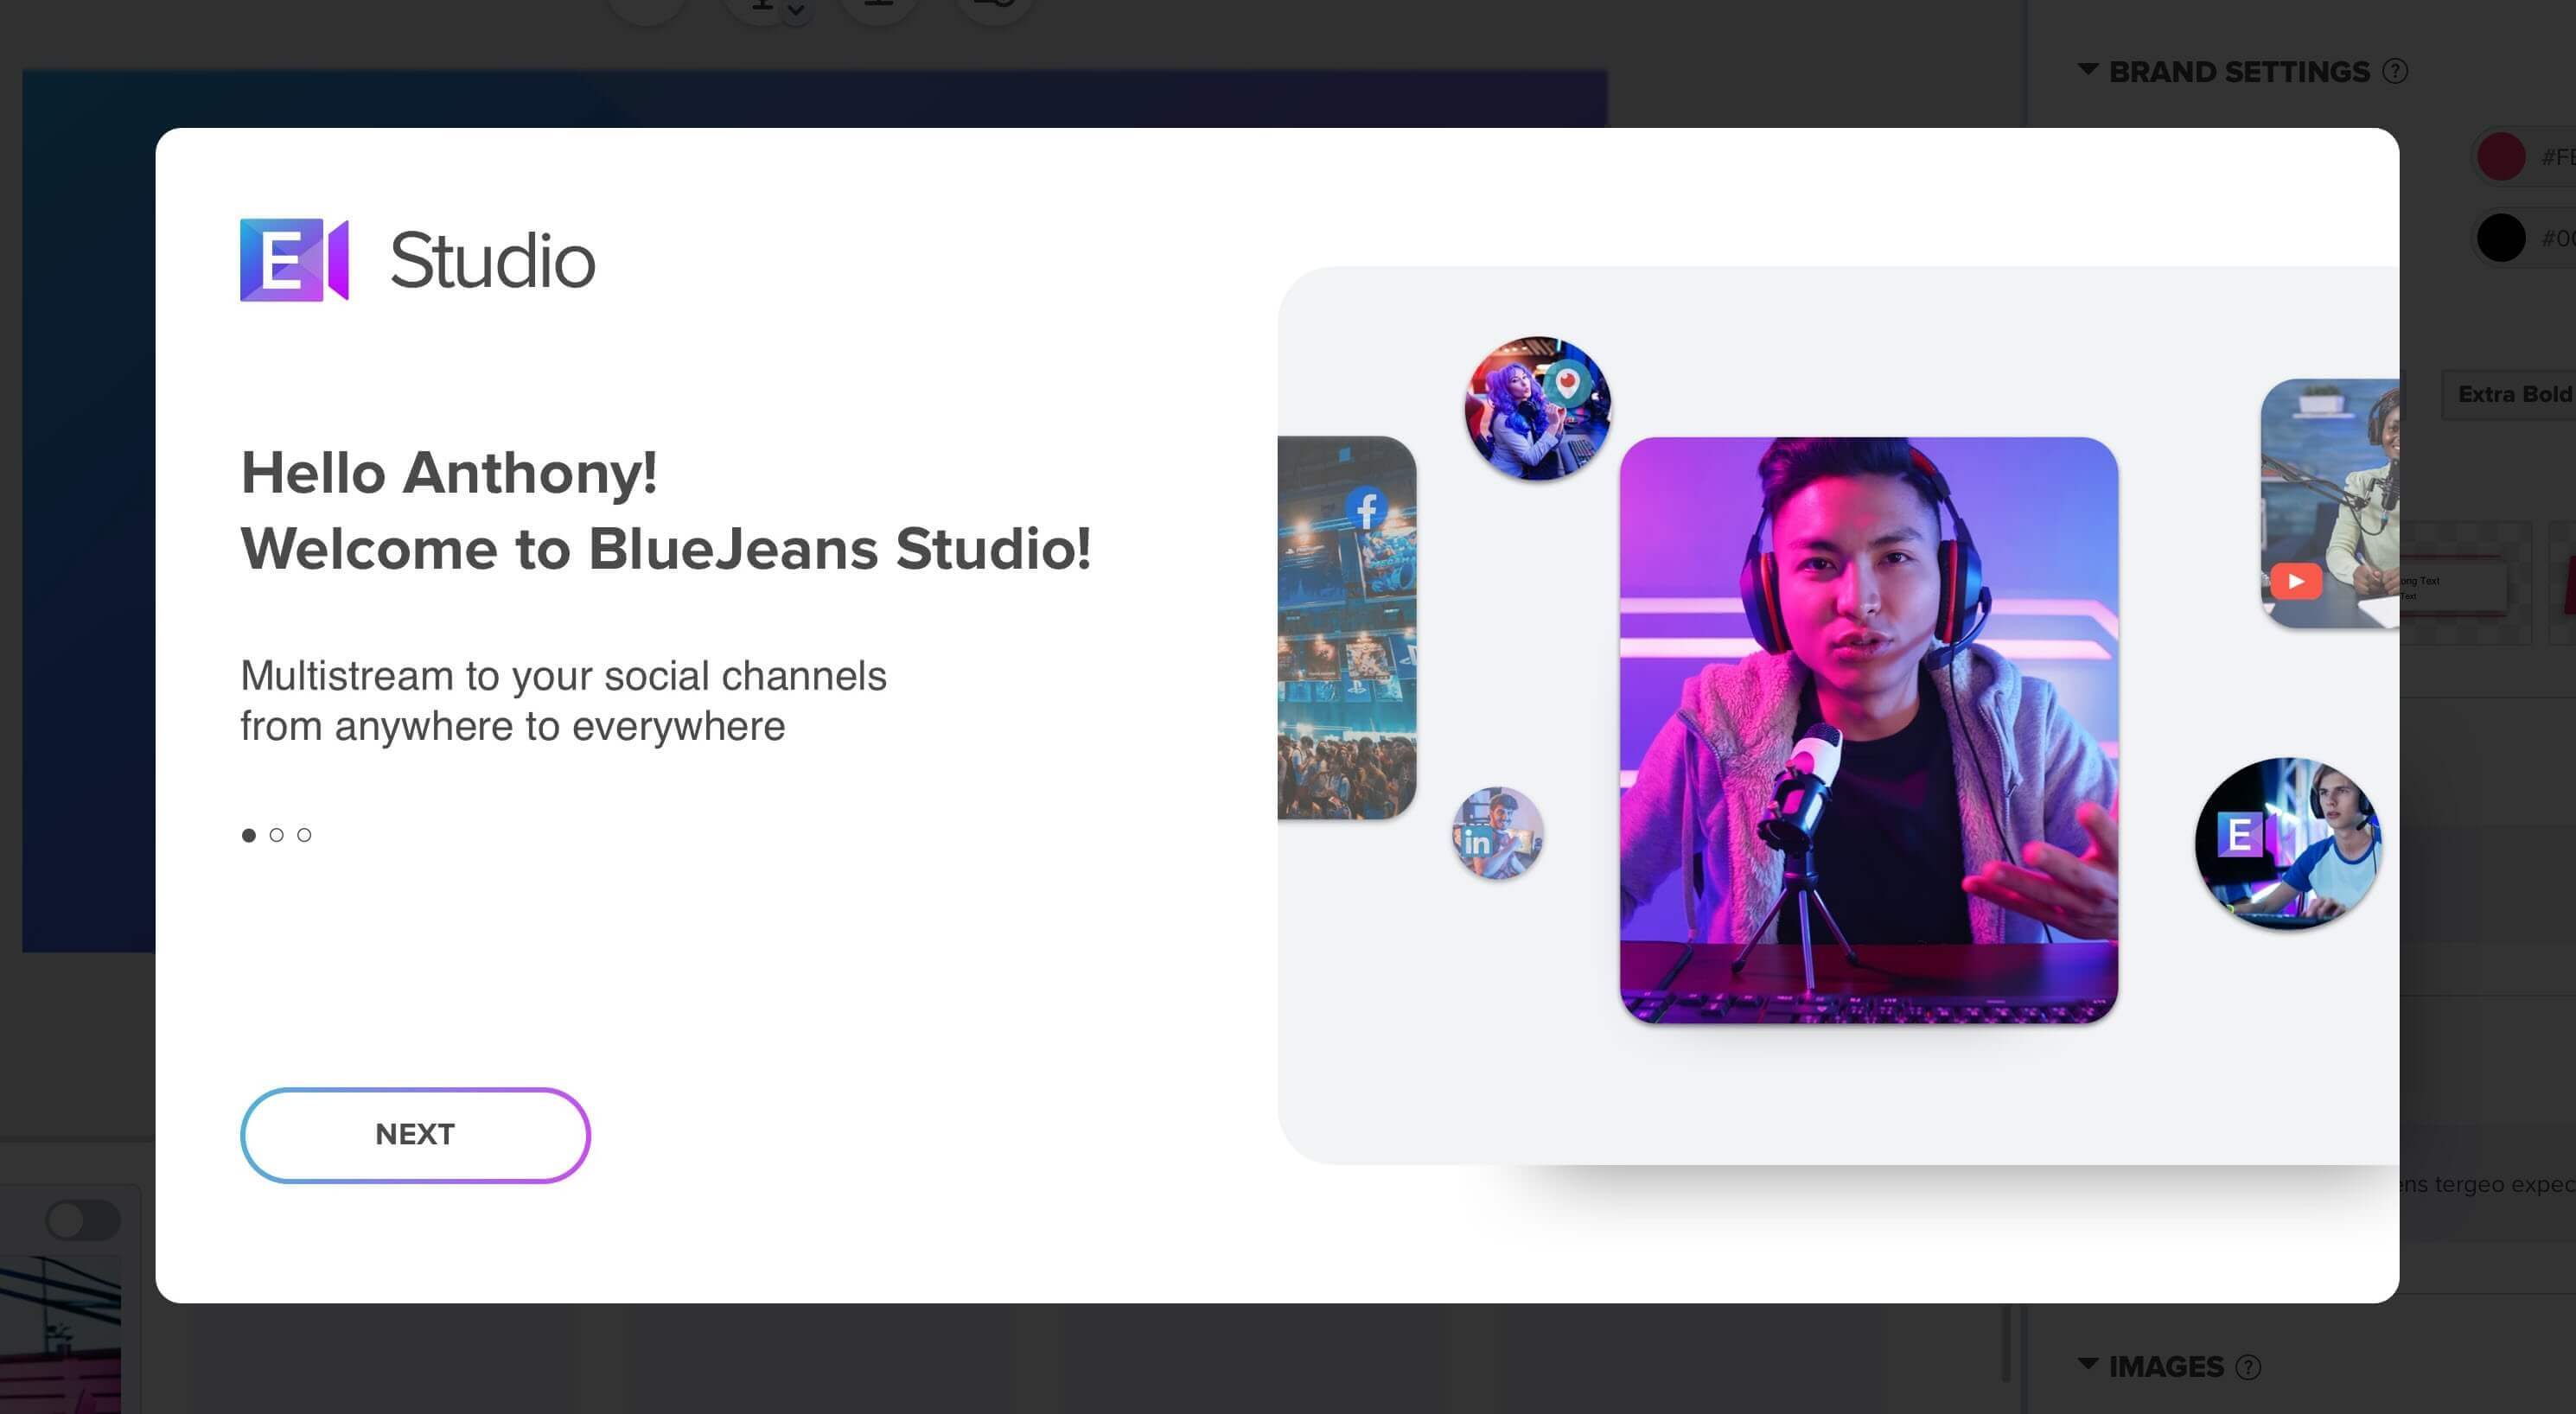 Live Streaming Events - BlueJeans Studio